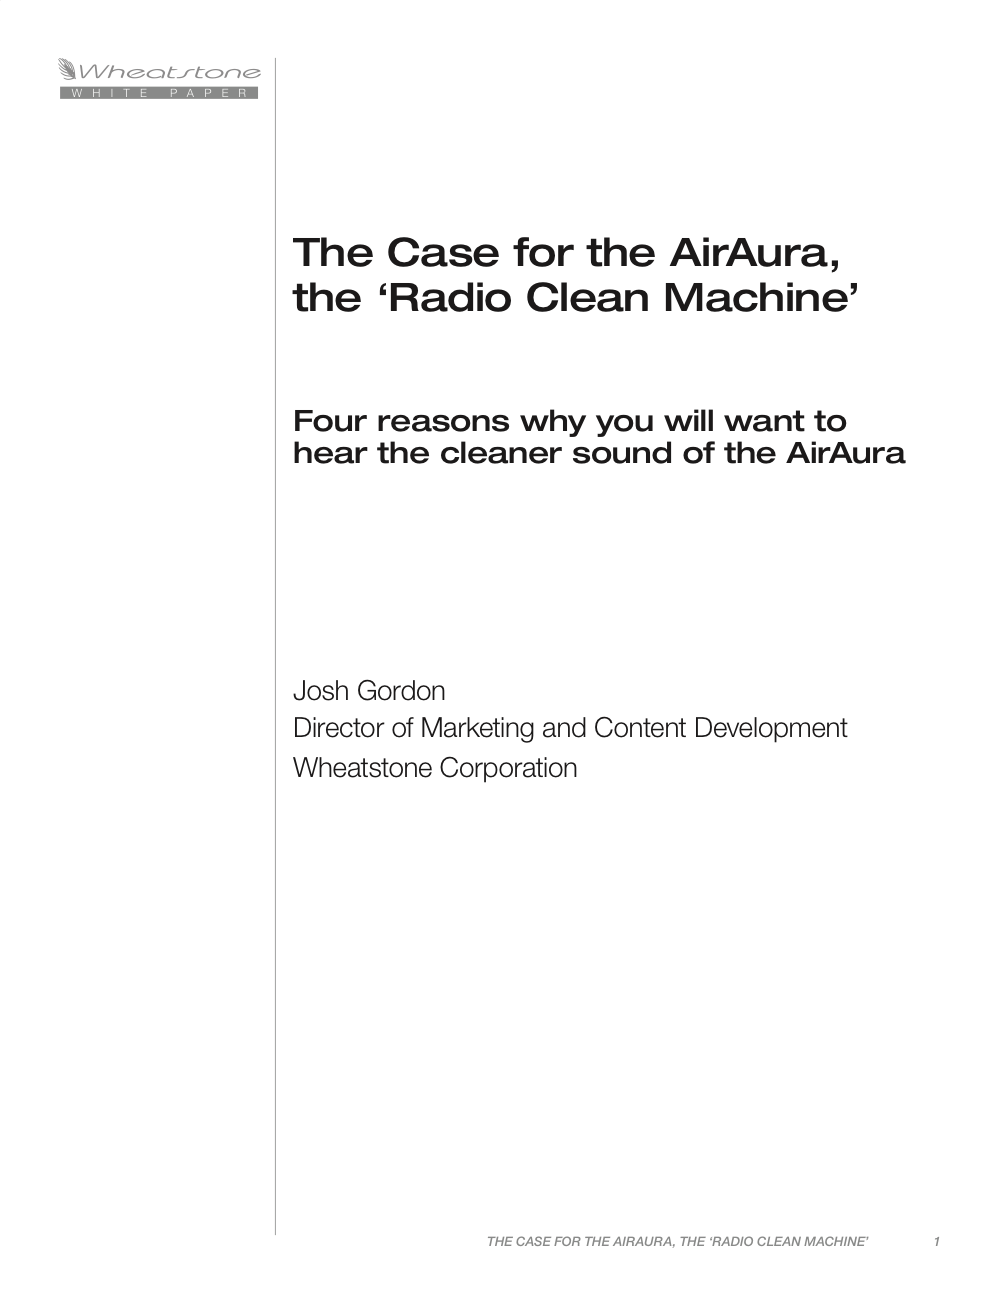 AirAura: The Case for the Clean Machine White Paper